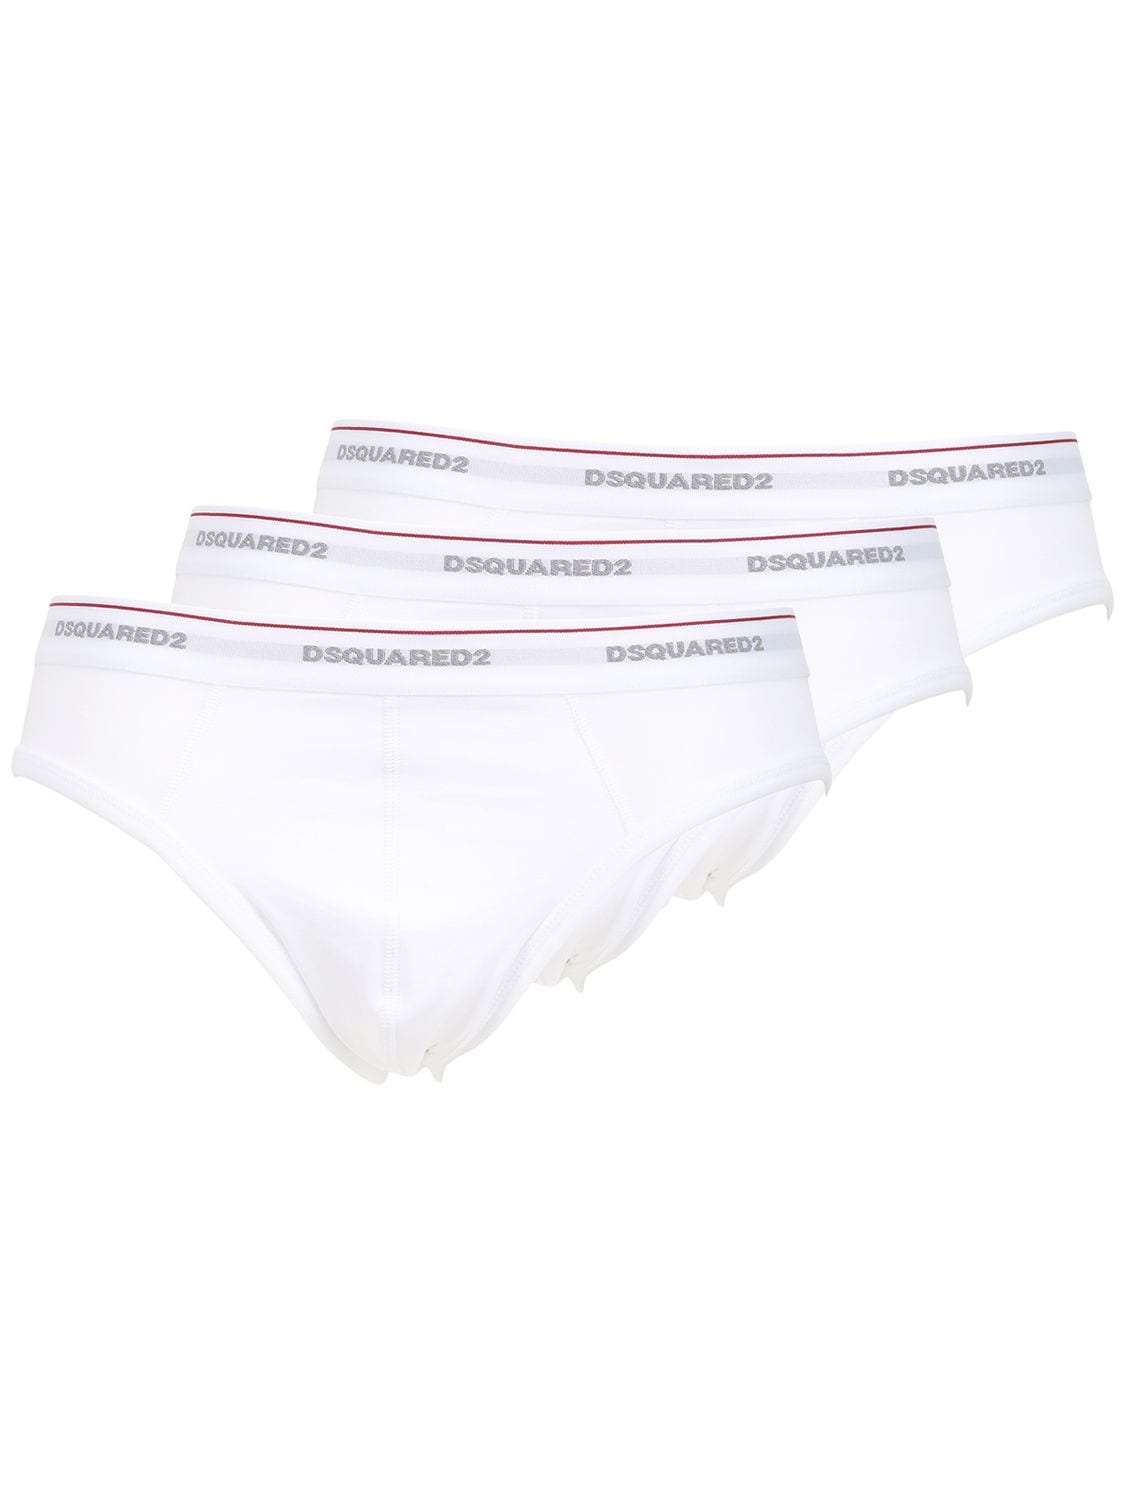 DSQUARED2 UNDERWEAR PACK OF 3 LOGO COTTON JERSEY BRIEFS,70I1VR014-MTAW0